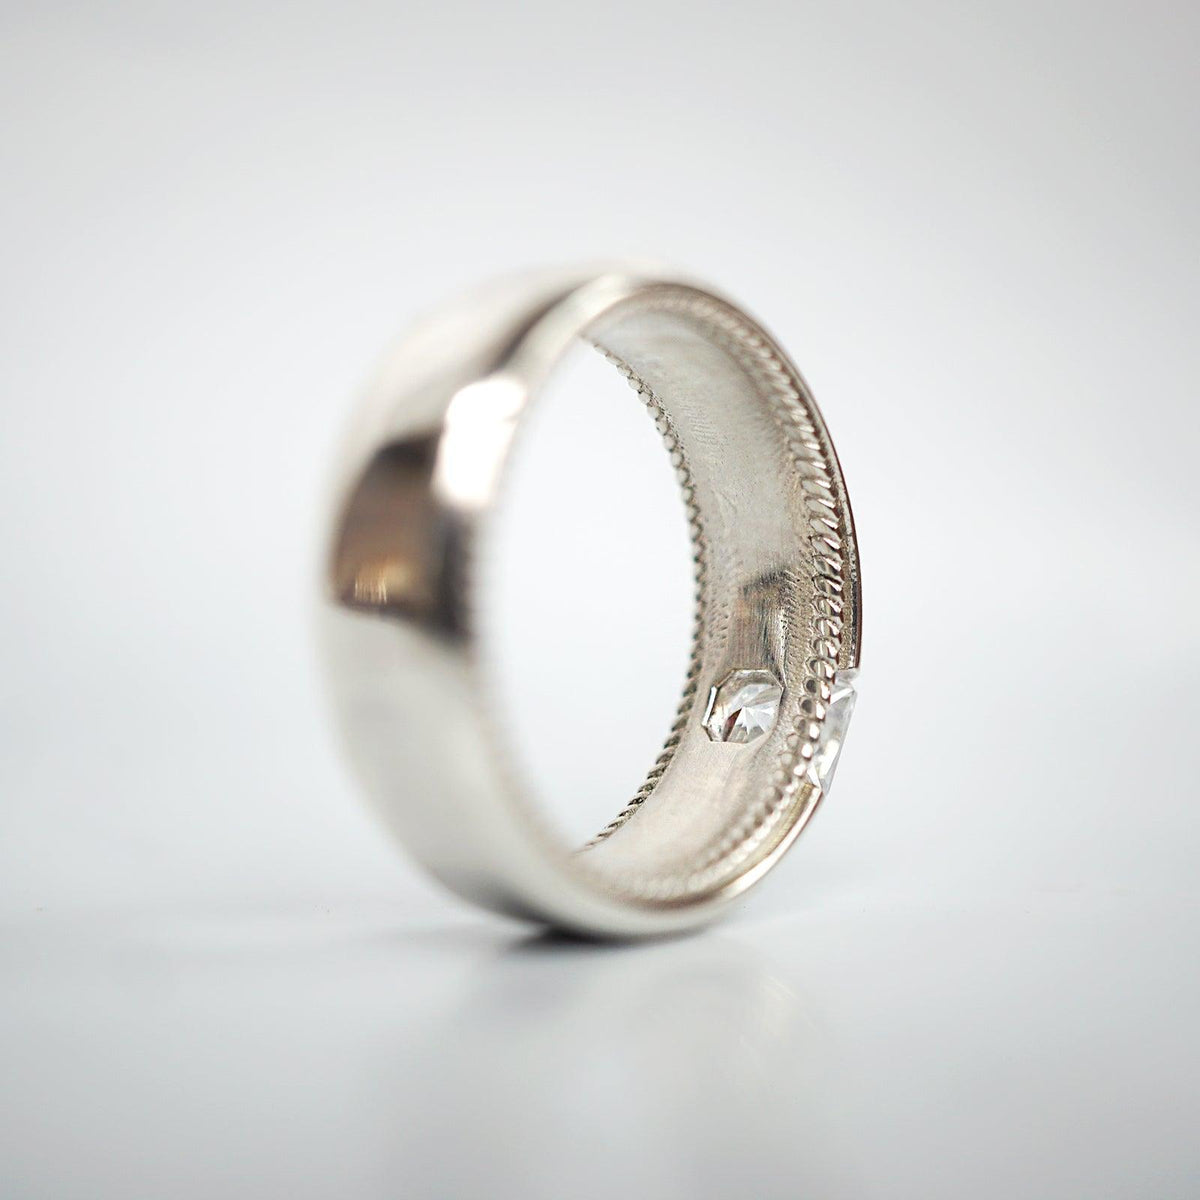 One Of A Kind: Diamond Bevel Ring in 14K Gold, 0.99ct